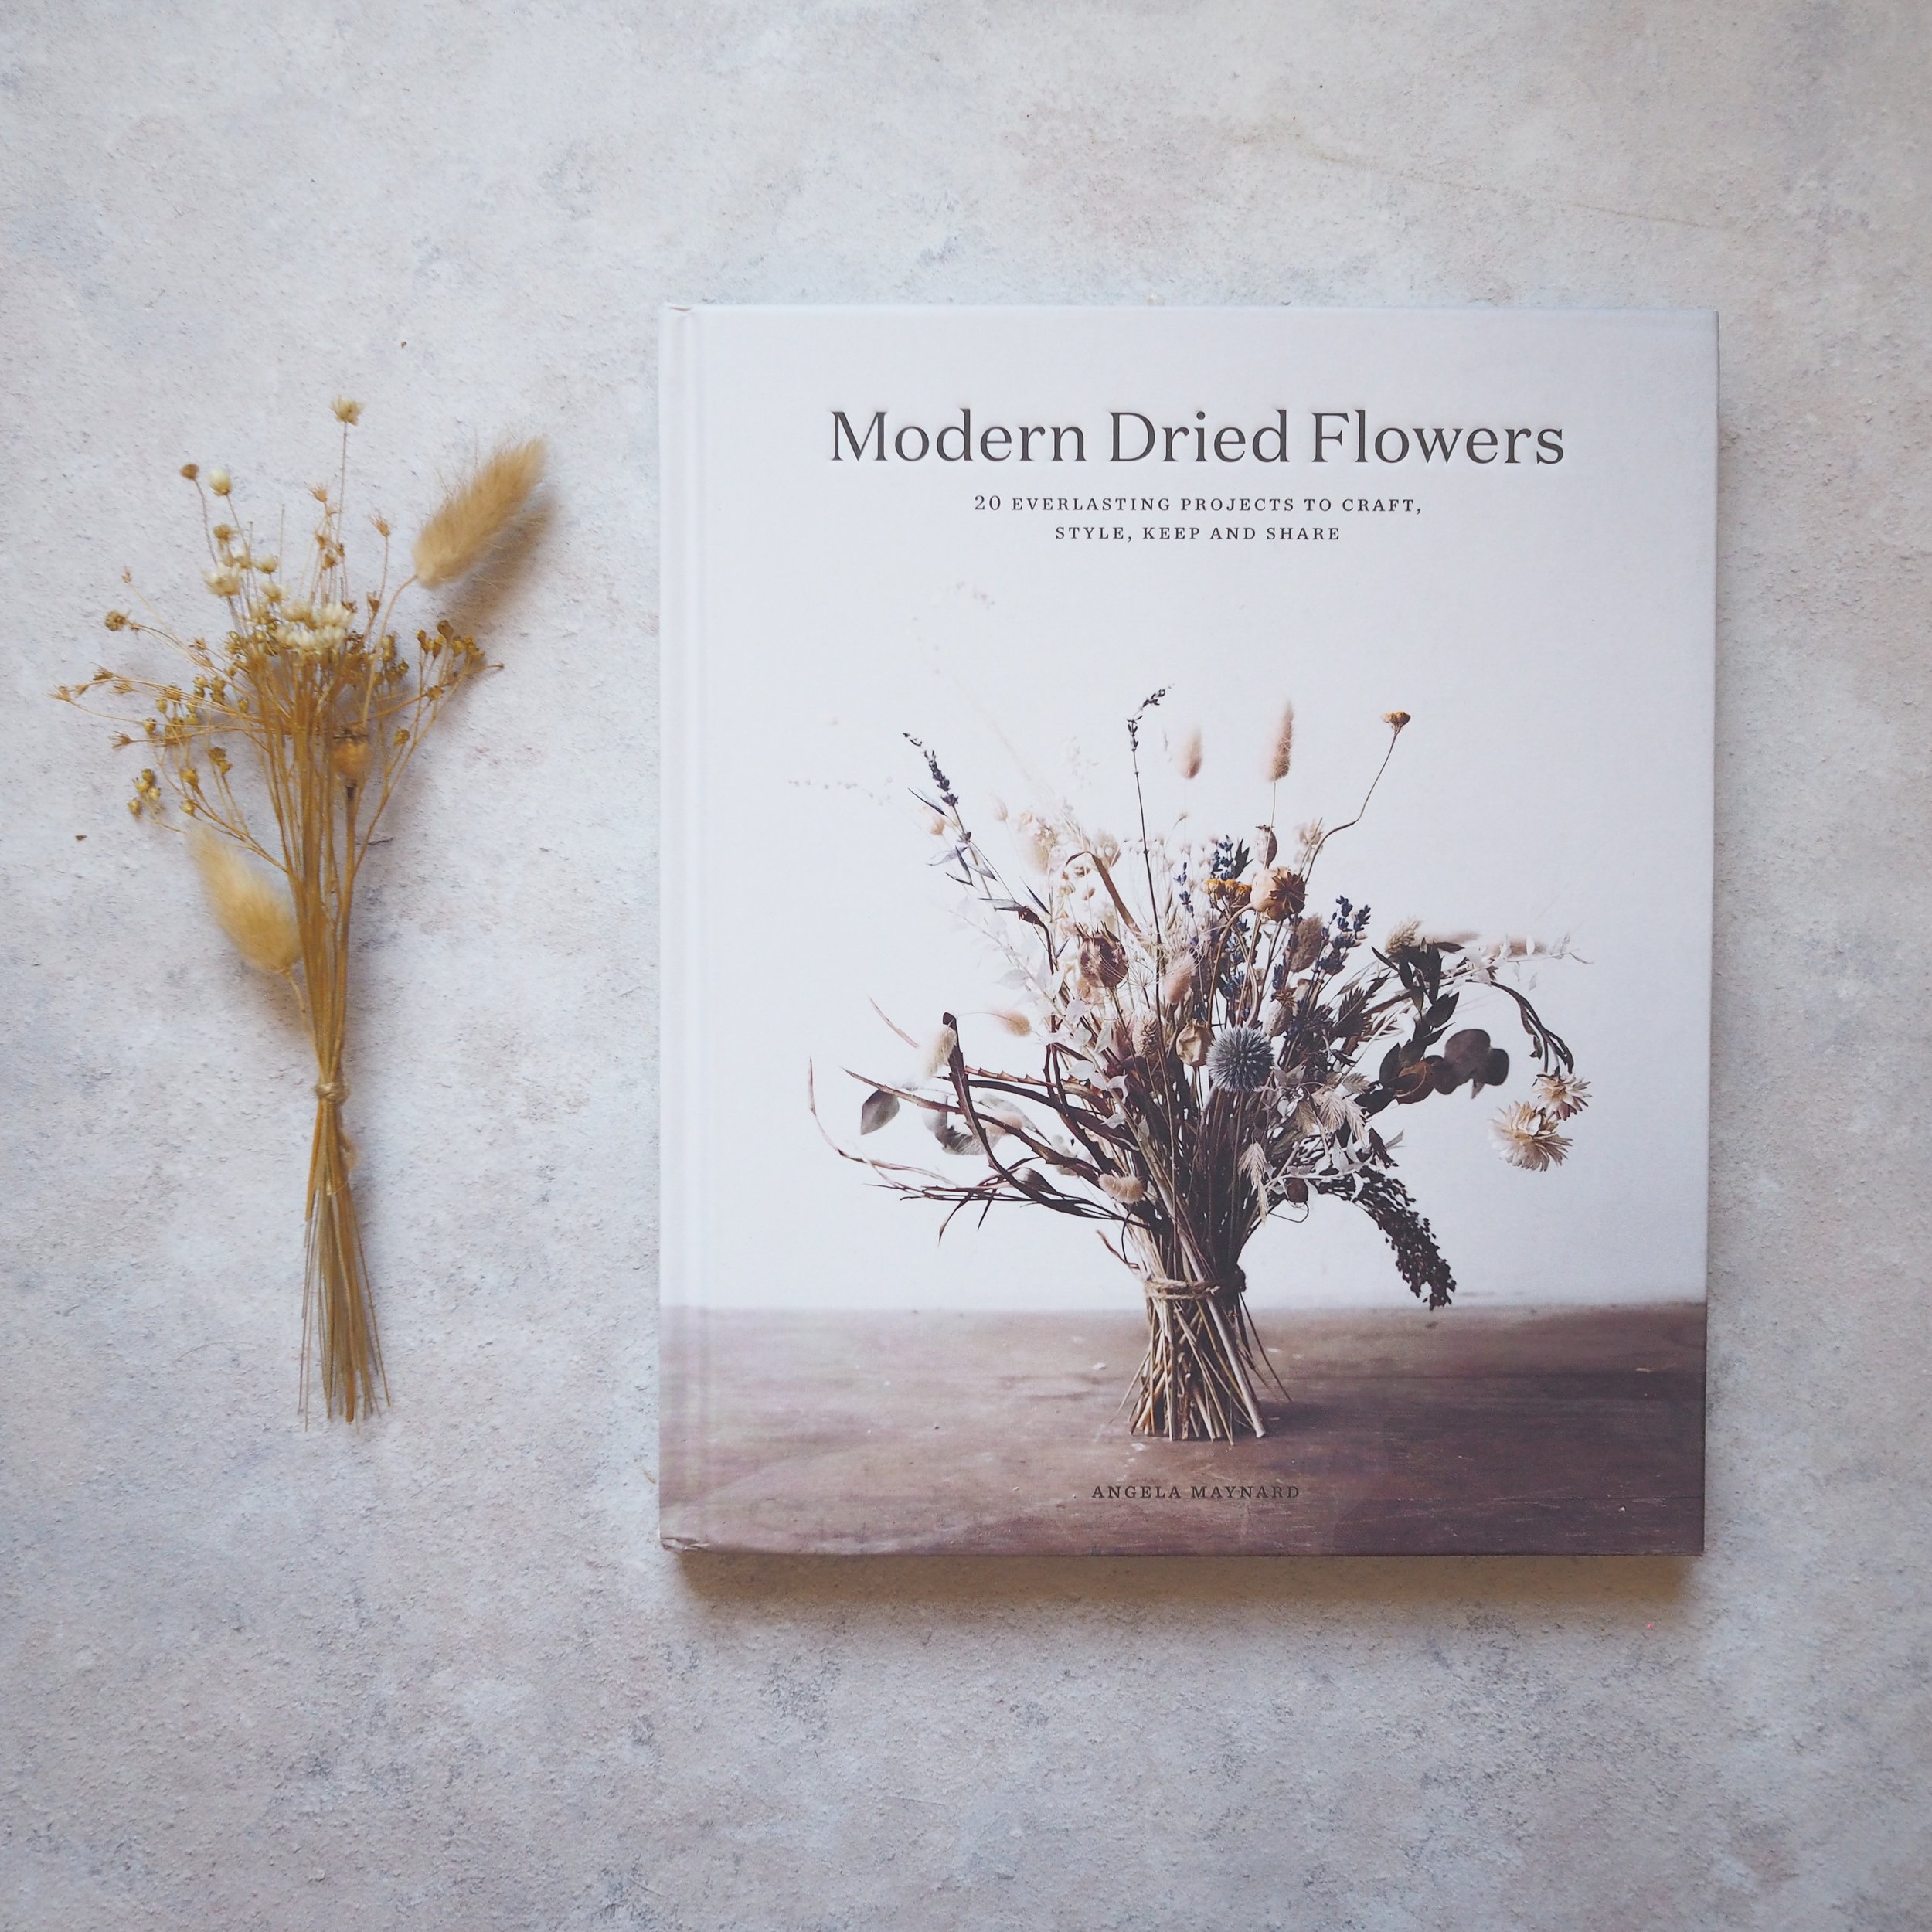 Modern Dried Flowers book cover